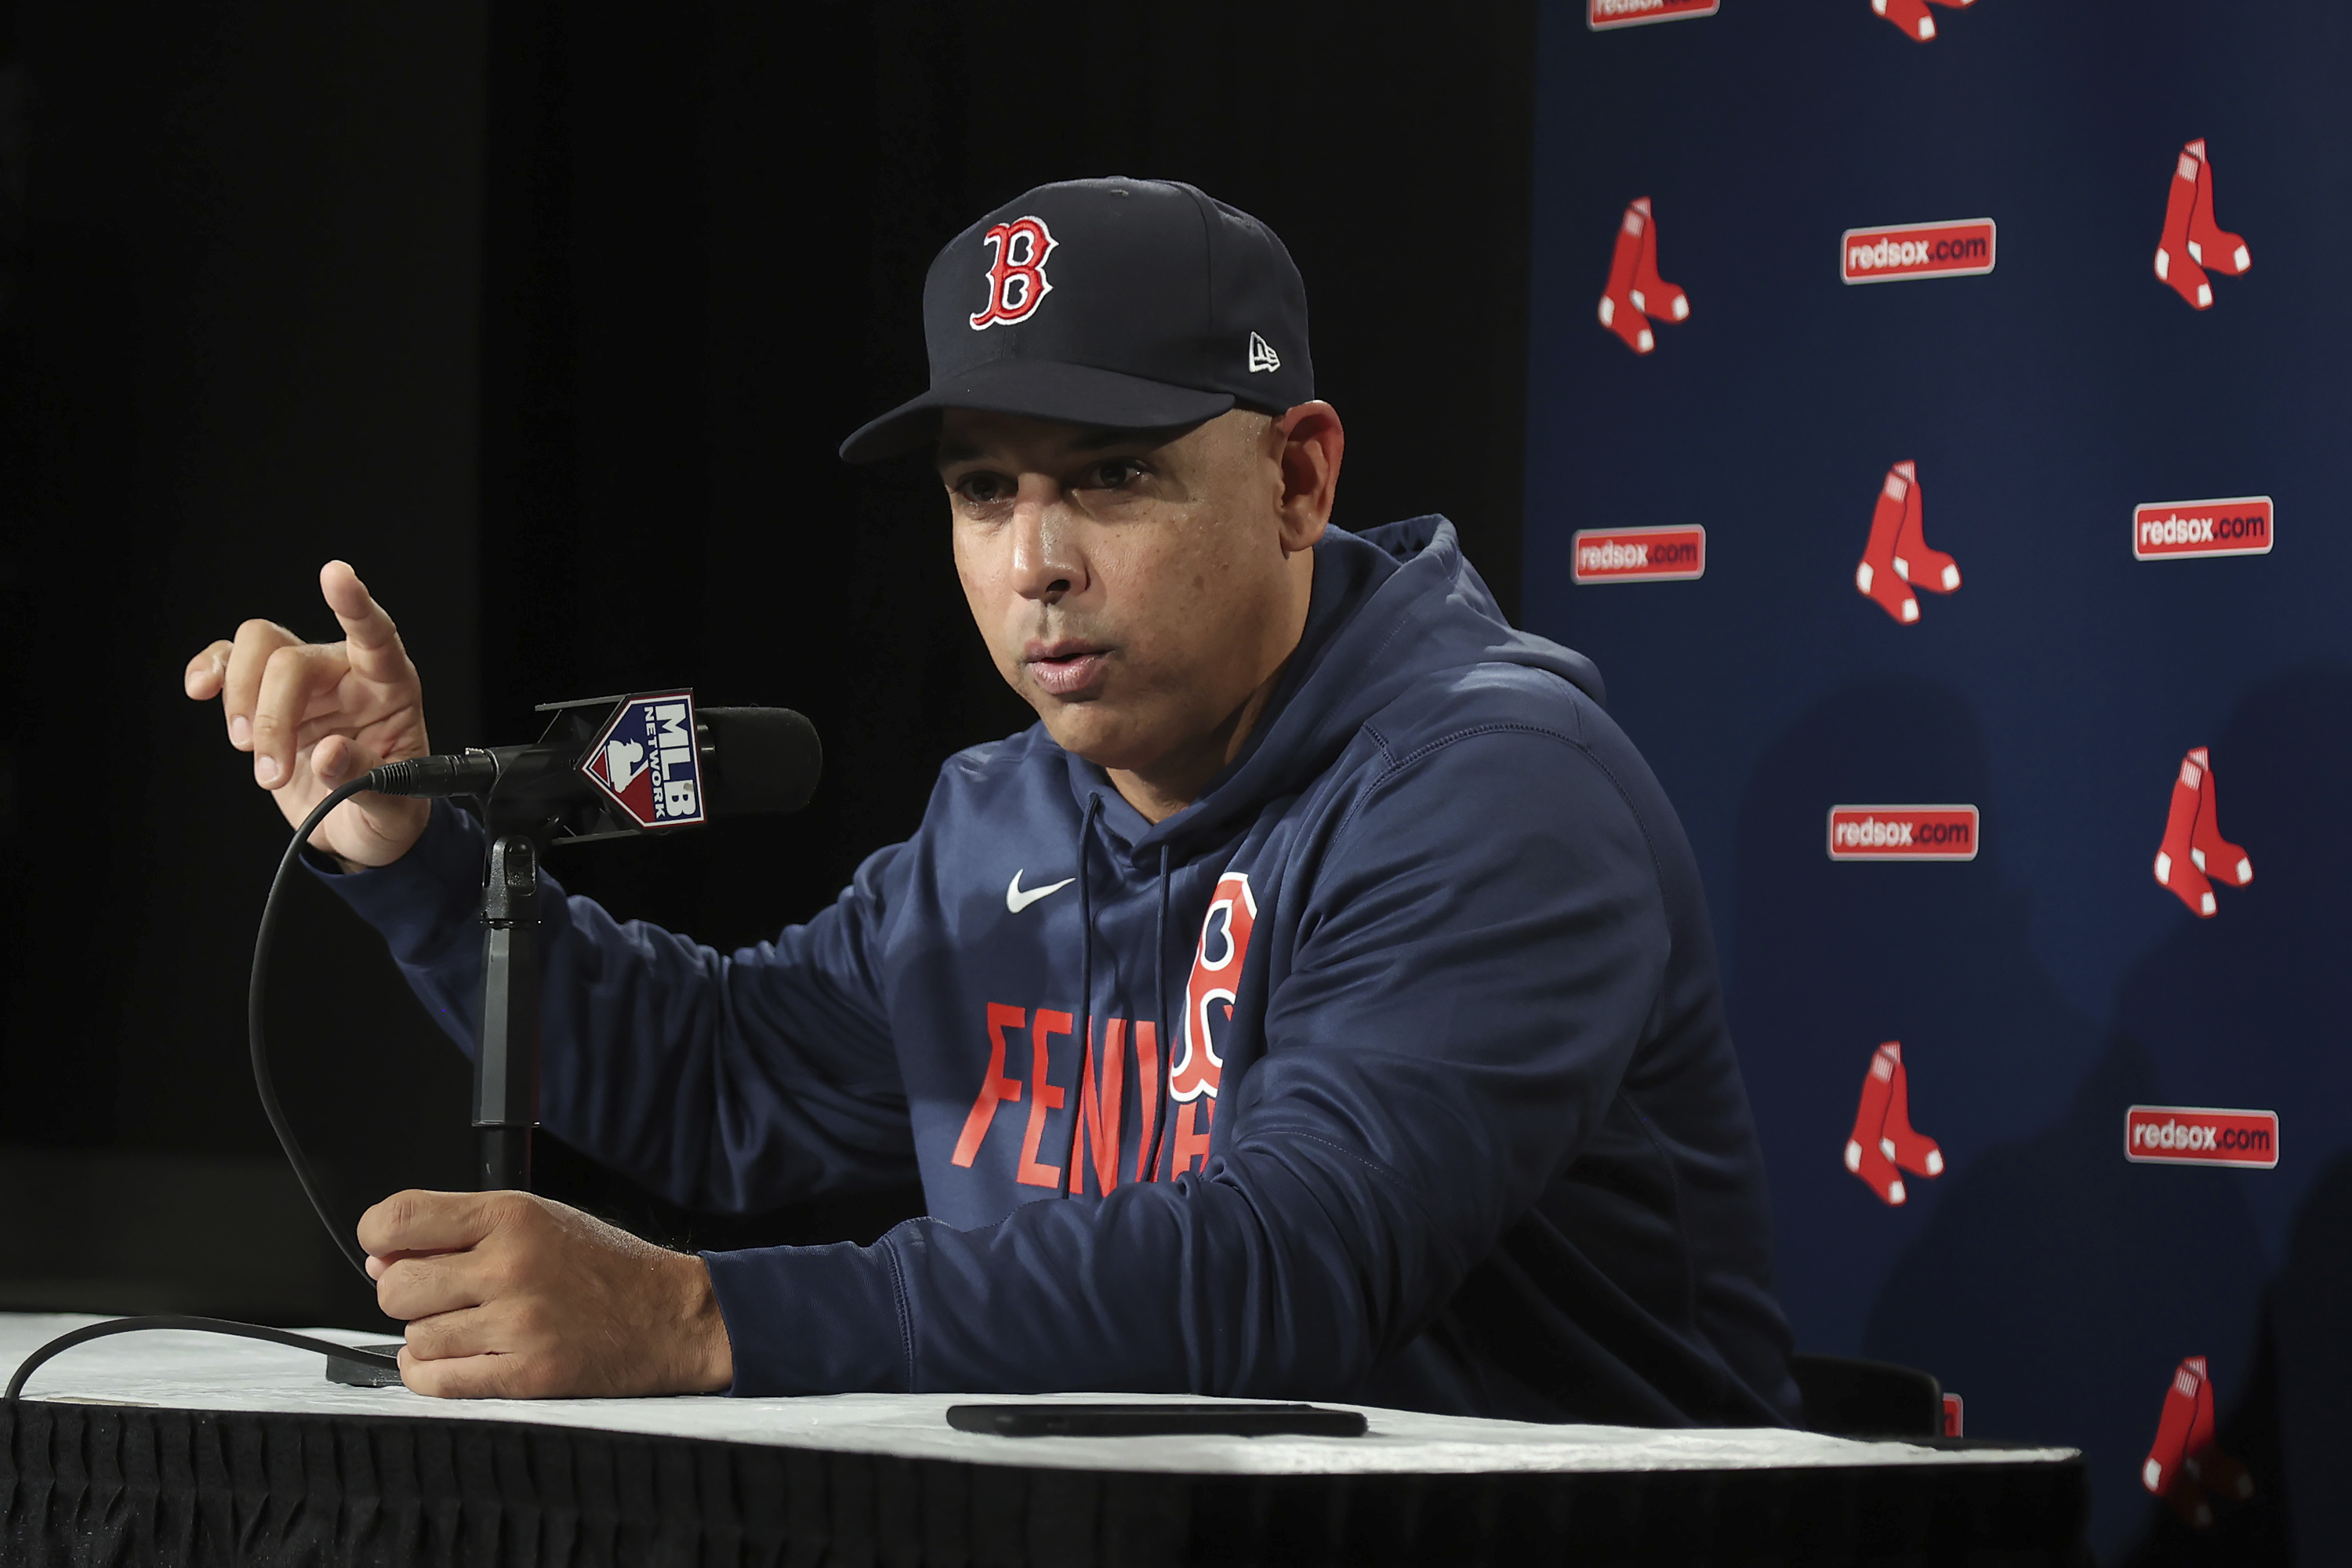 Alex Cora says he has extra motivation this year, and it's not